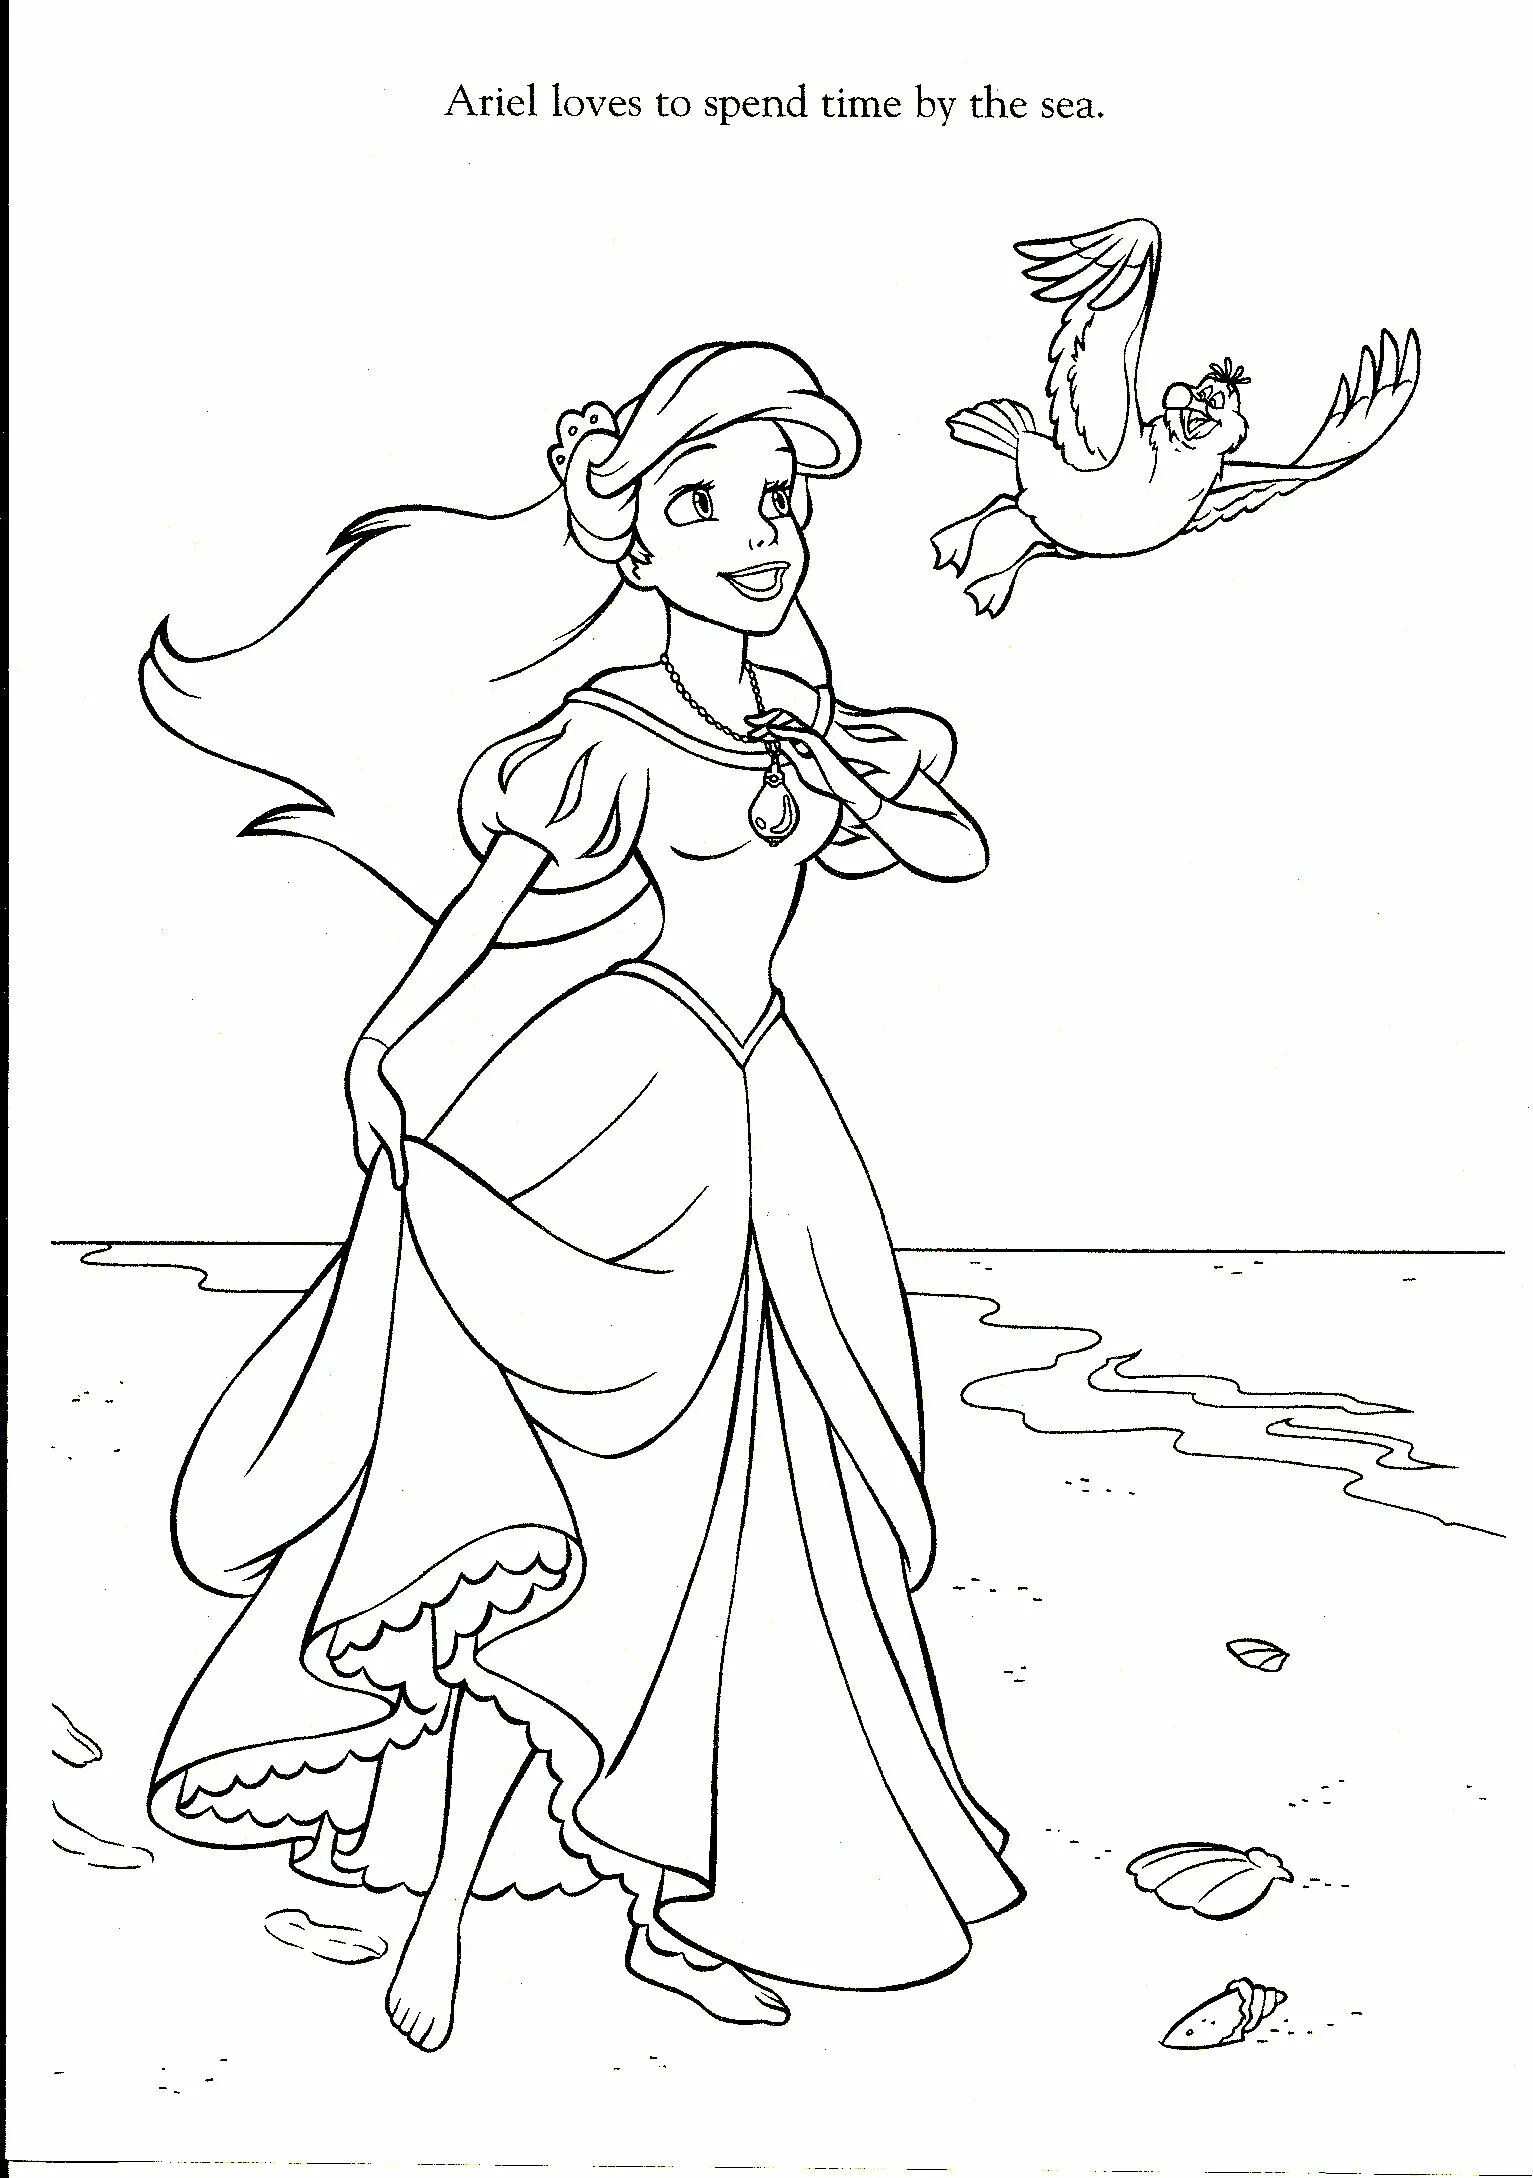 Coloring book glowing ariel with legs